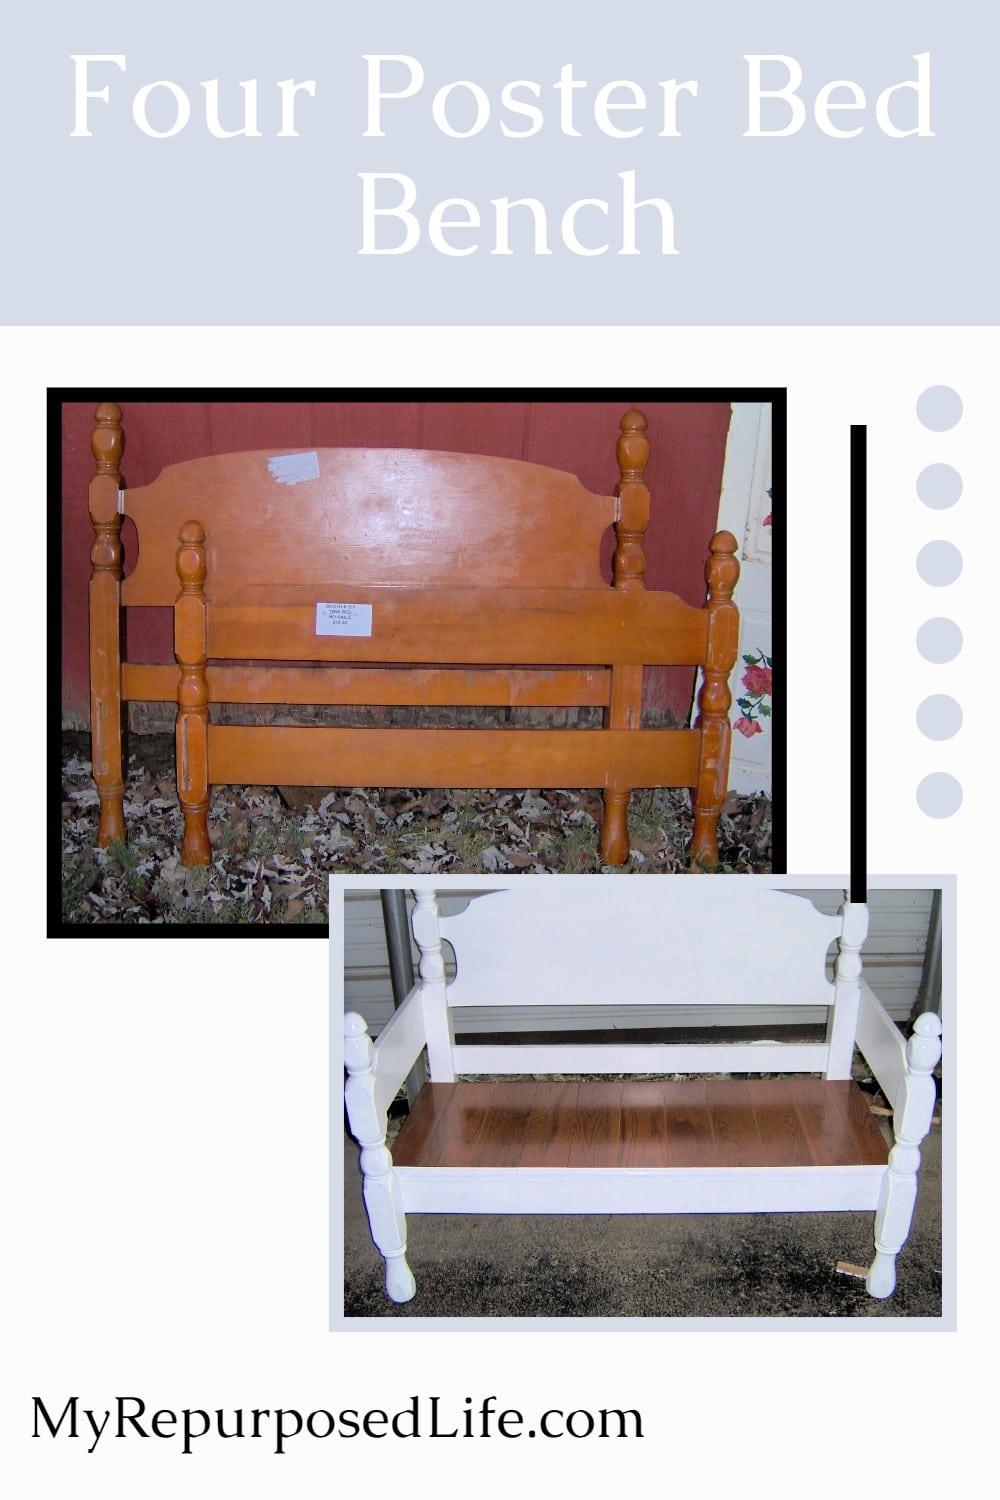 How to make a headboard bench from a small four poster bed. This is one of the easiest ways ever to make a headboard bench. Perfect for beginners. #MyRepurposedLife #headboard #bench via @repurposedlife